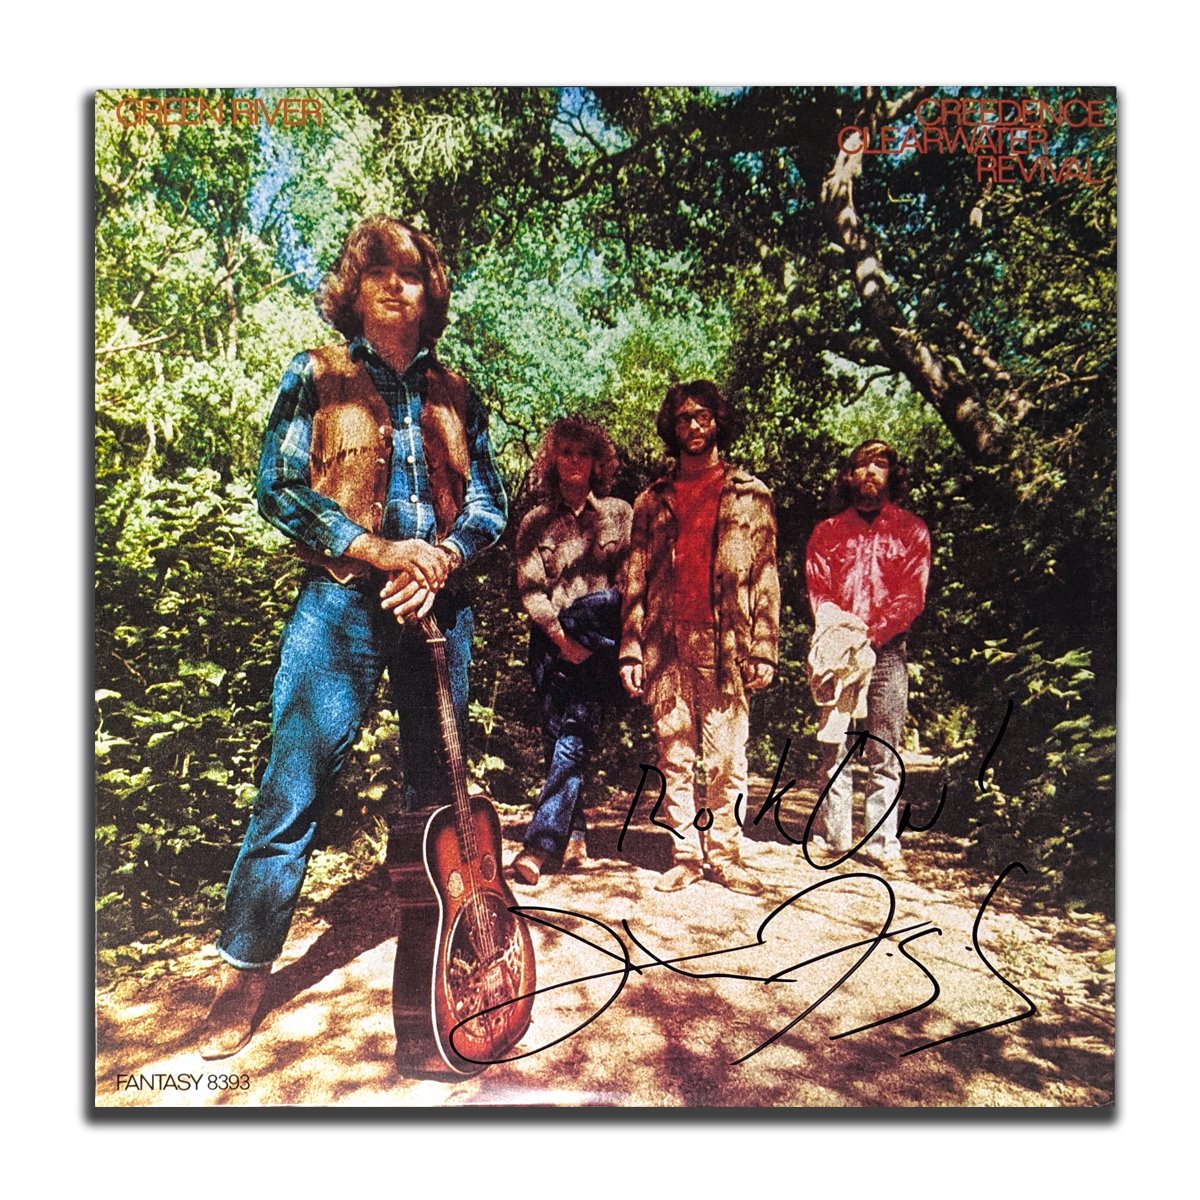 John Fogerty Creedence Clearwater Revival CCR Signed GREEN RIVER Autographed Vinyl Album LP